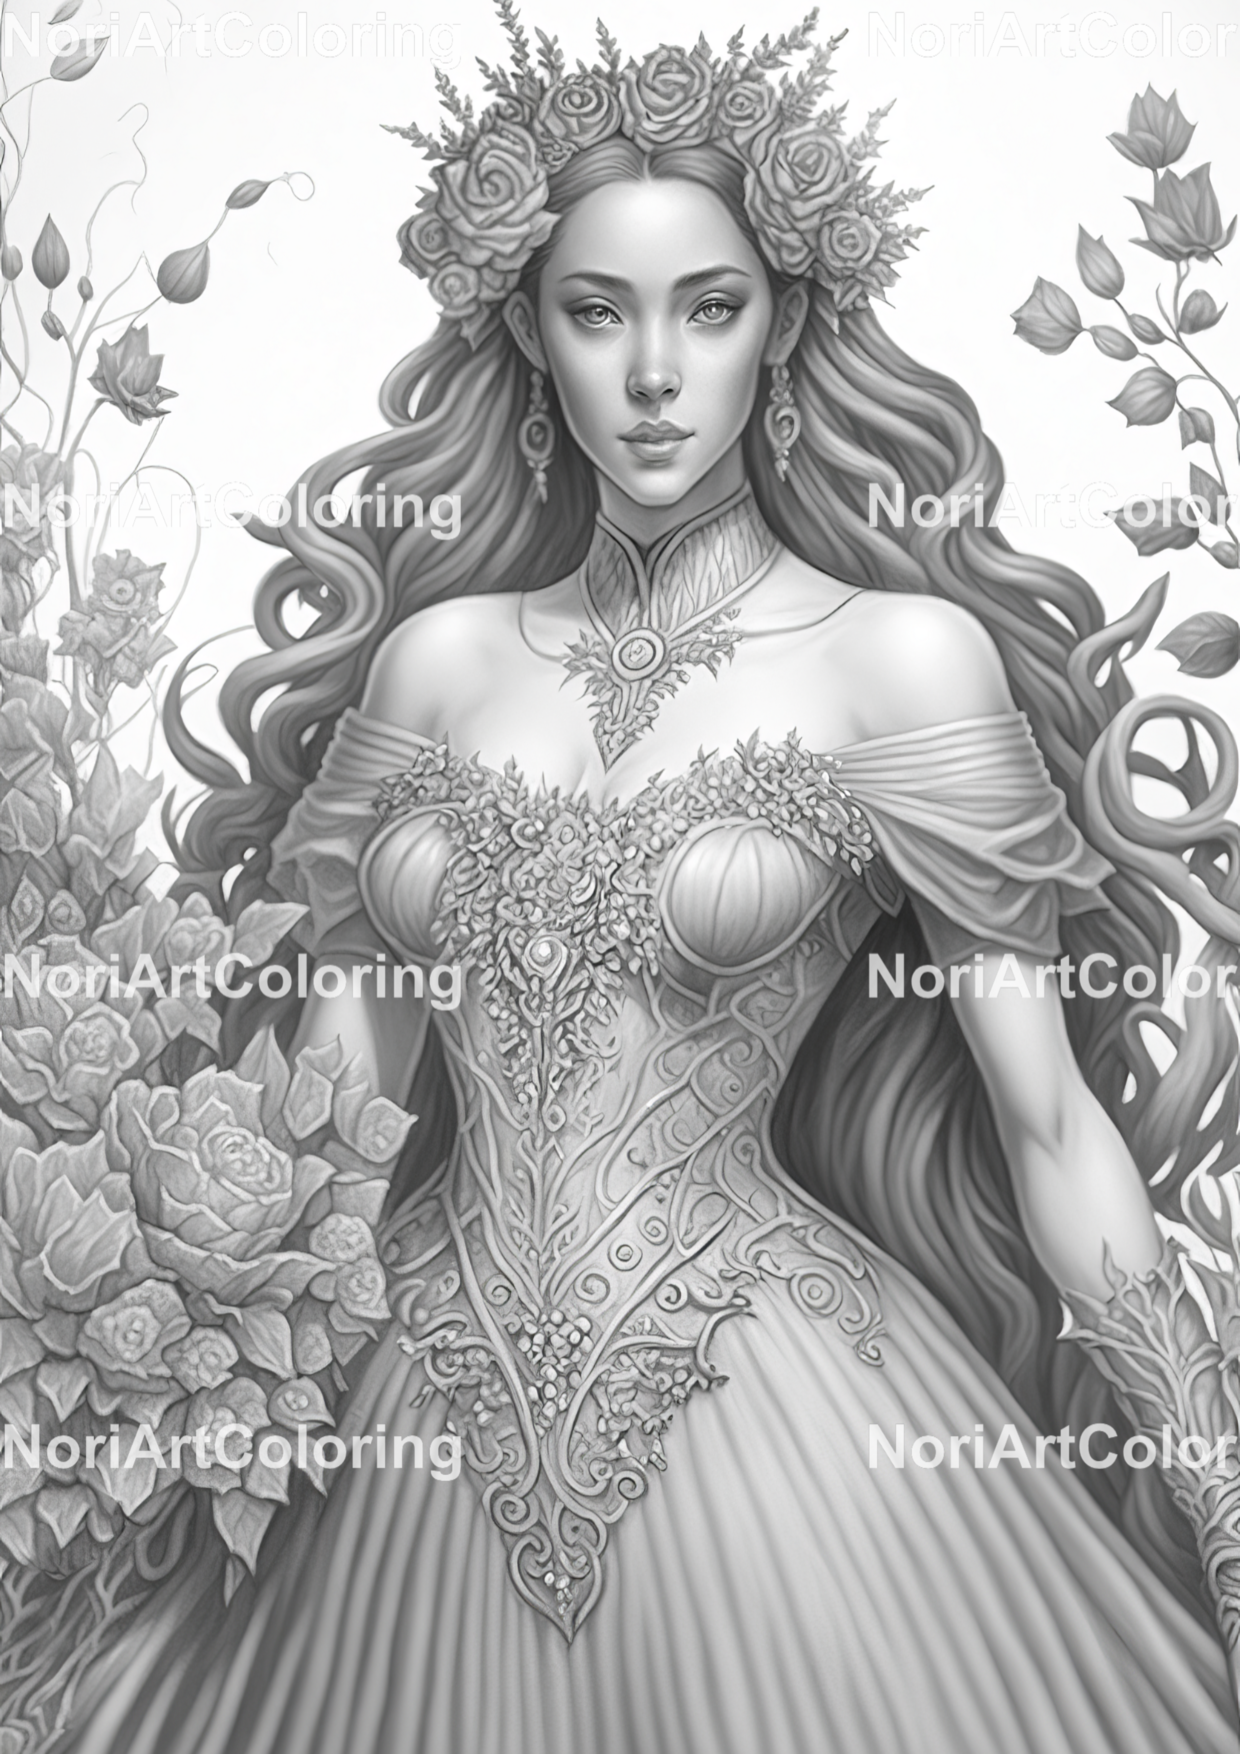 Floral princess vol coloring pages printable adult coloring pages download grayscale illustration printable